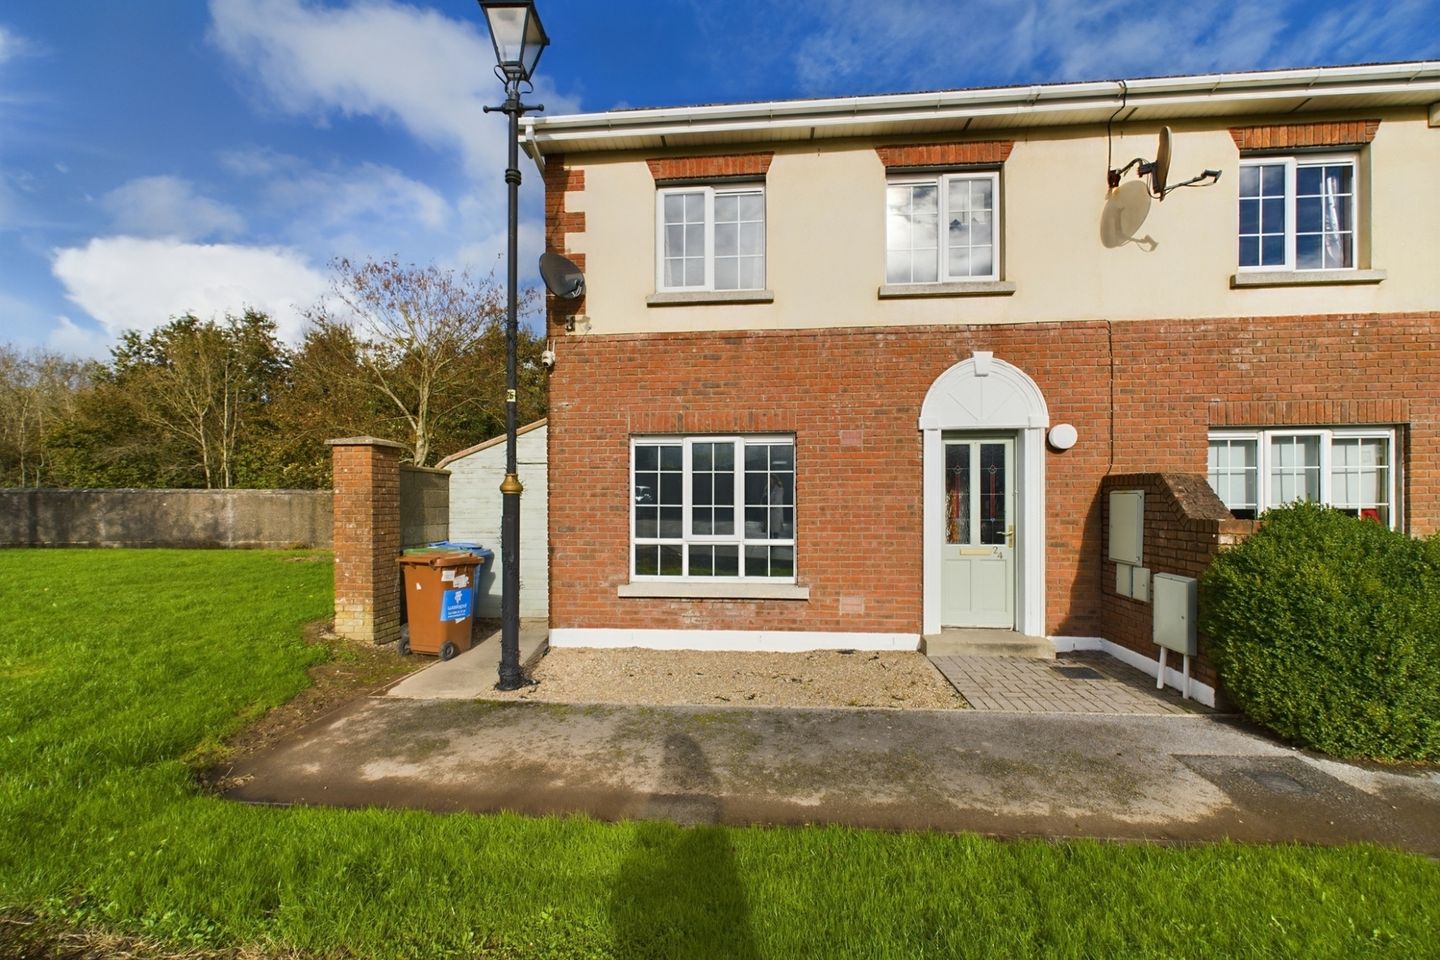 24 Carn Glas Way, Gracedieu, Waterford, Waterford City, Co. Waterford, X91HKR8